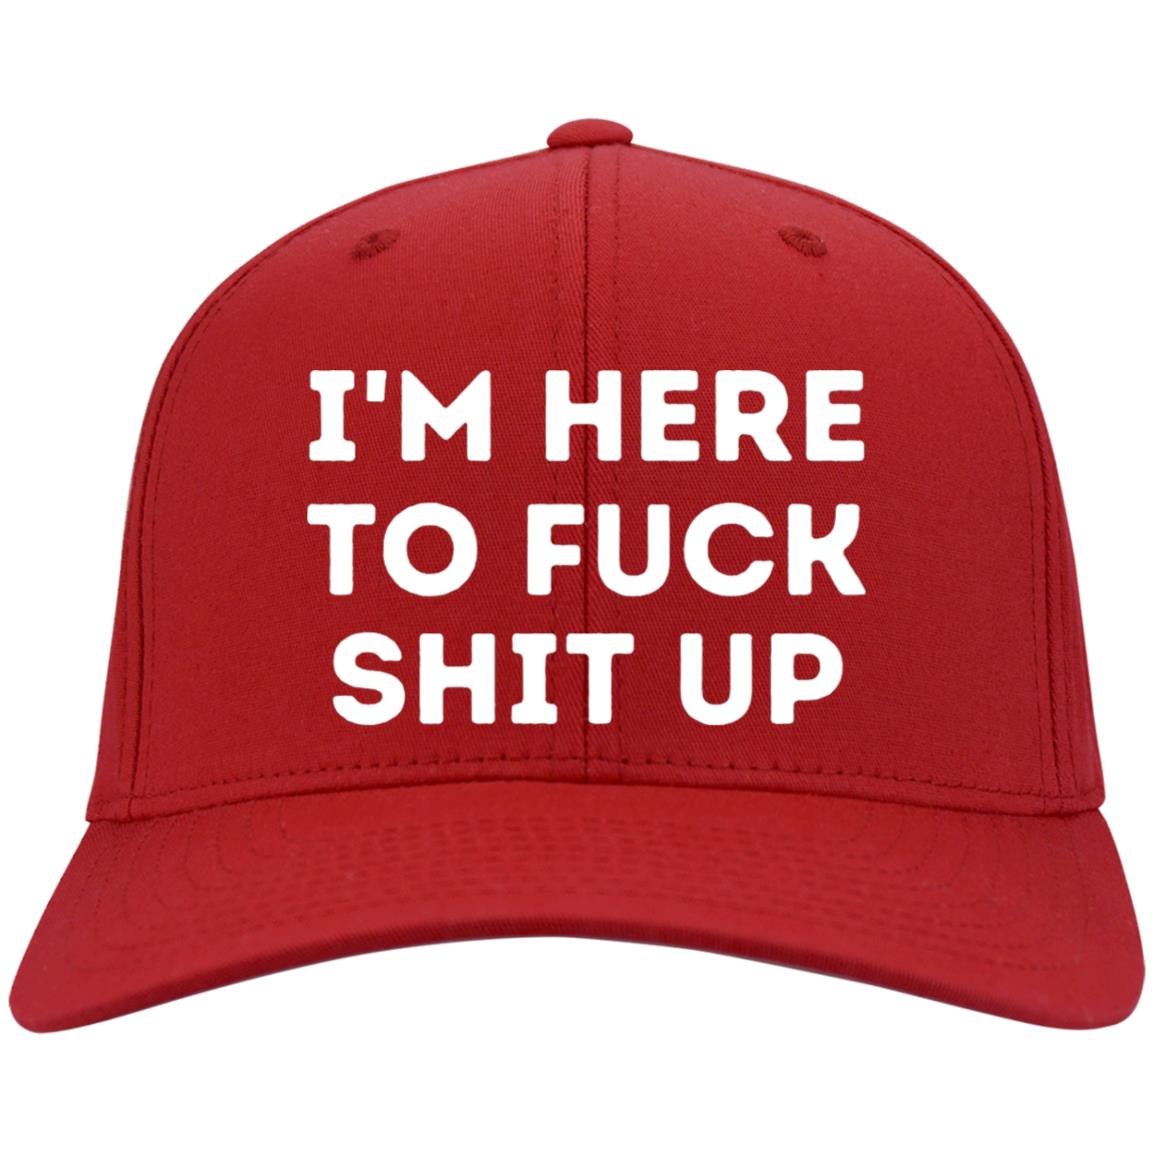 I'm Here To Fu@k Shit Up Sarcastic Trouble Maker Twill Cap